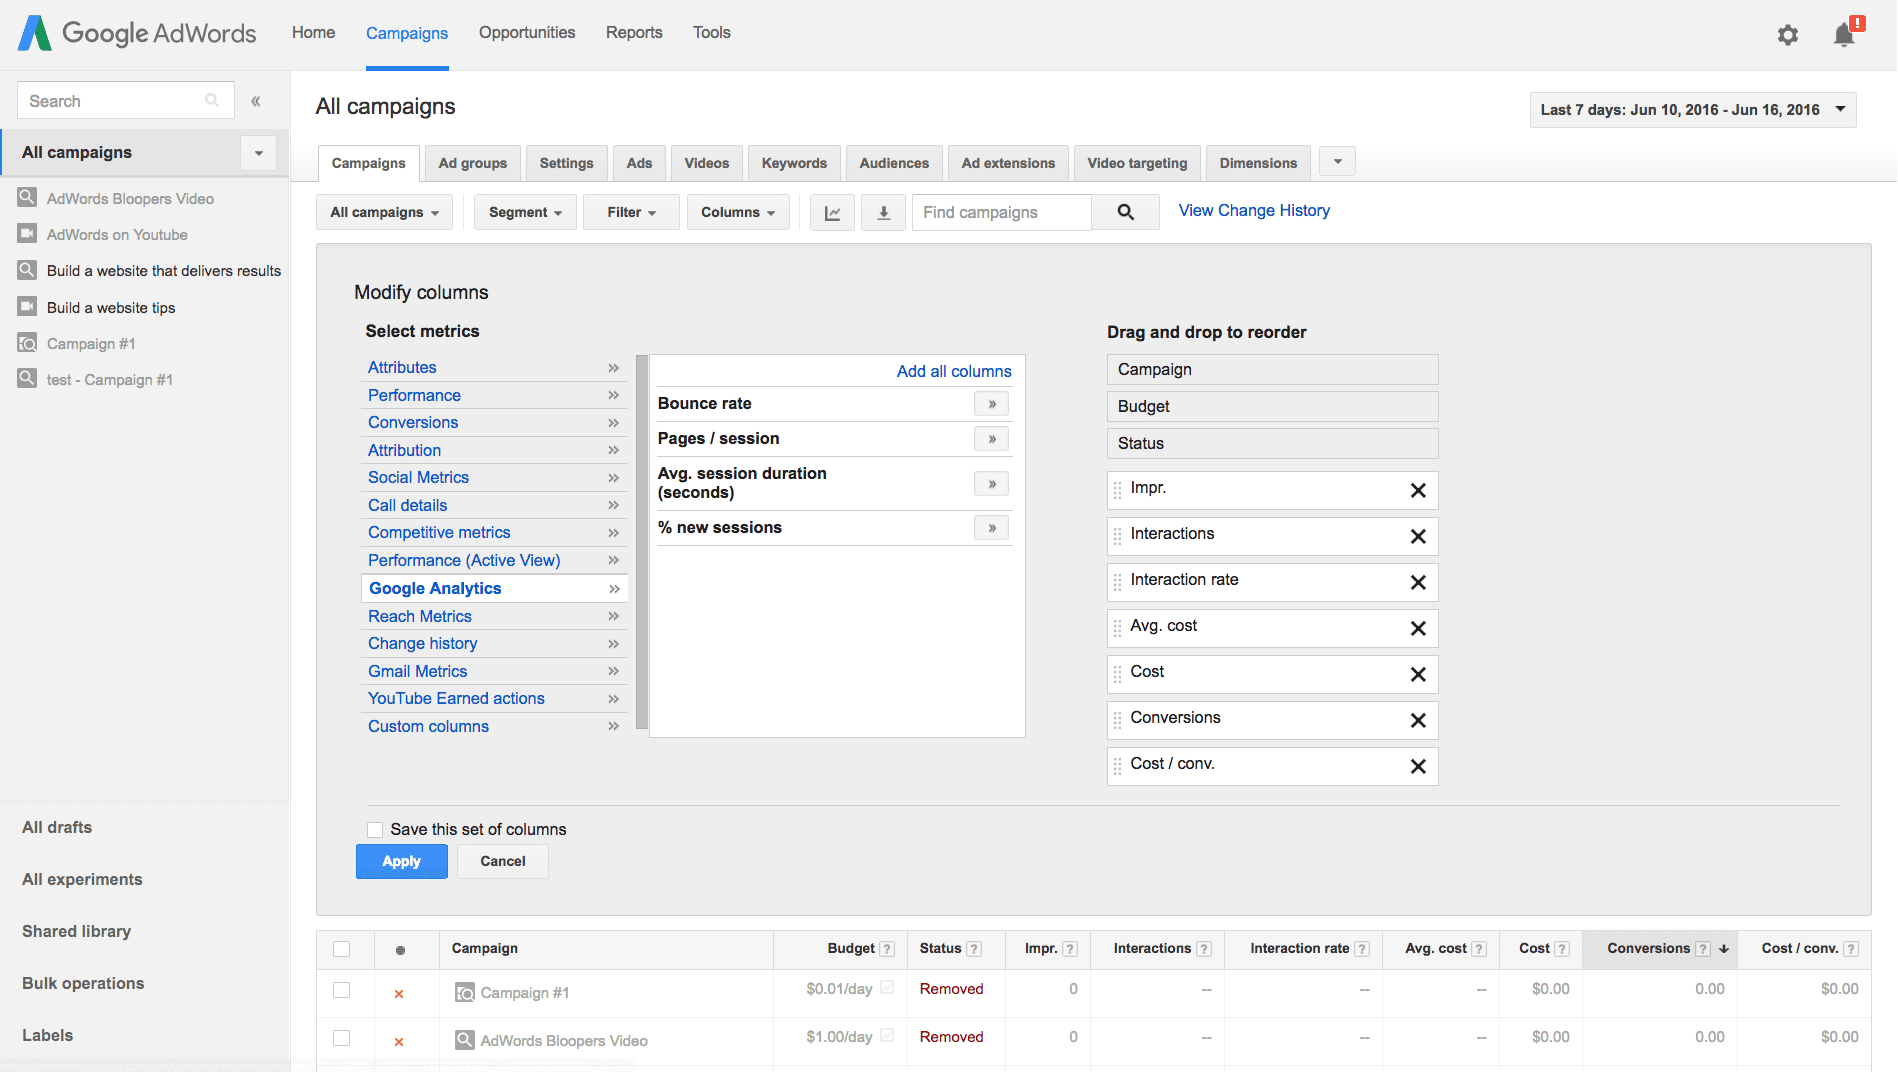 How to Add Analytic Metrics to Google Adwords